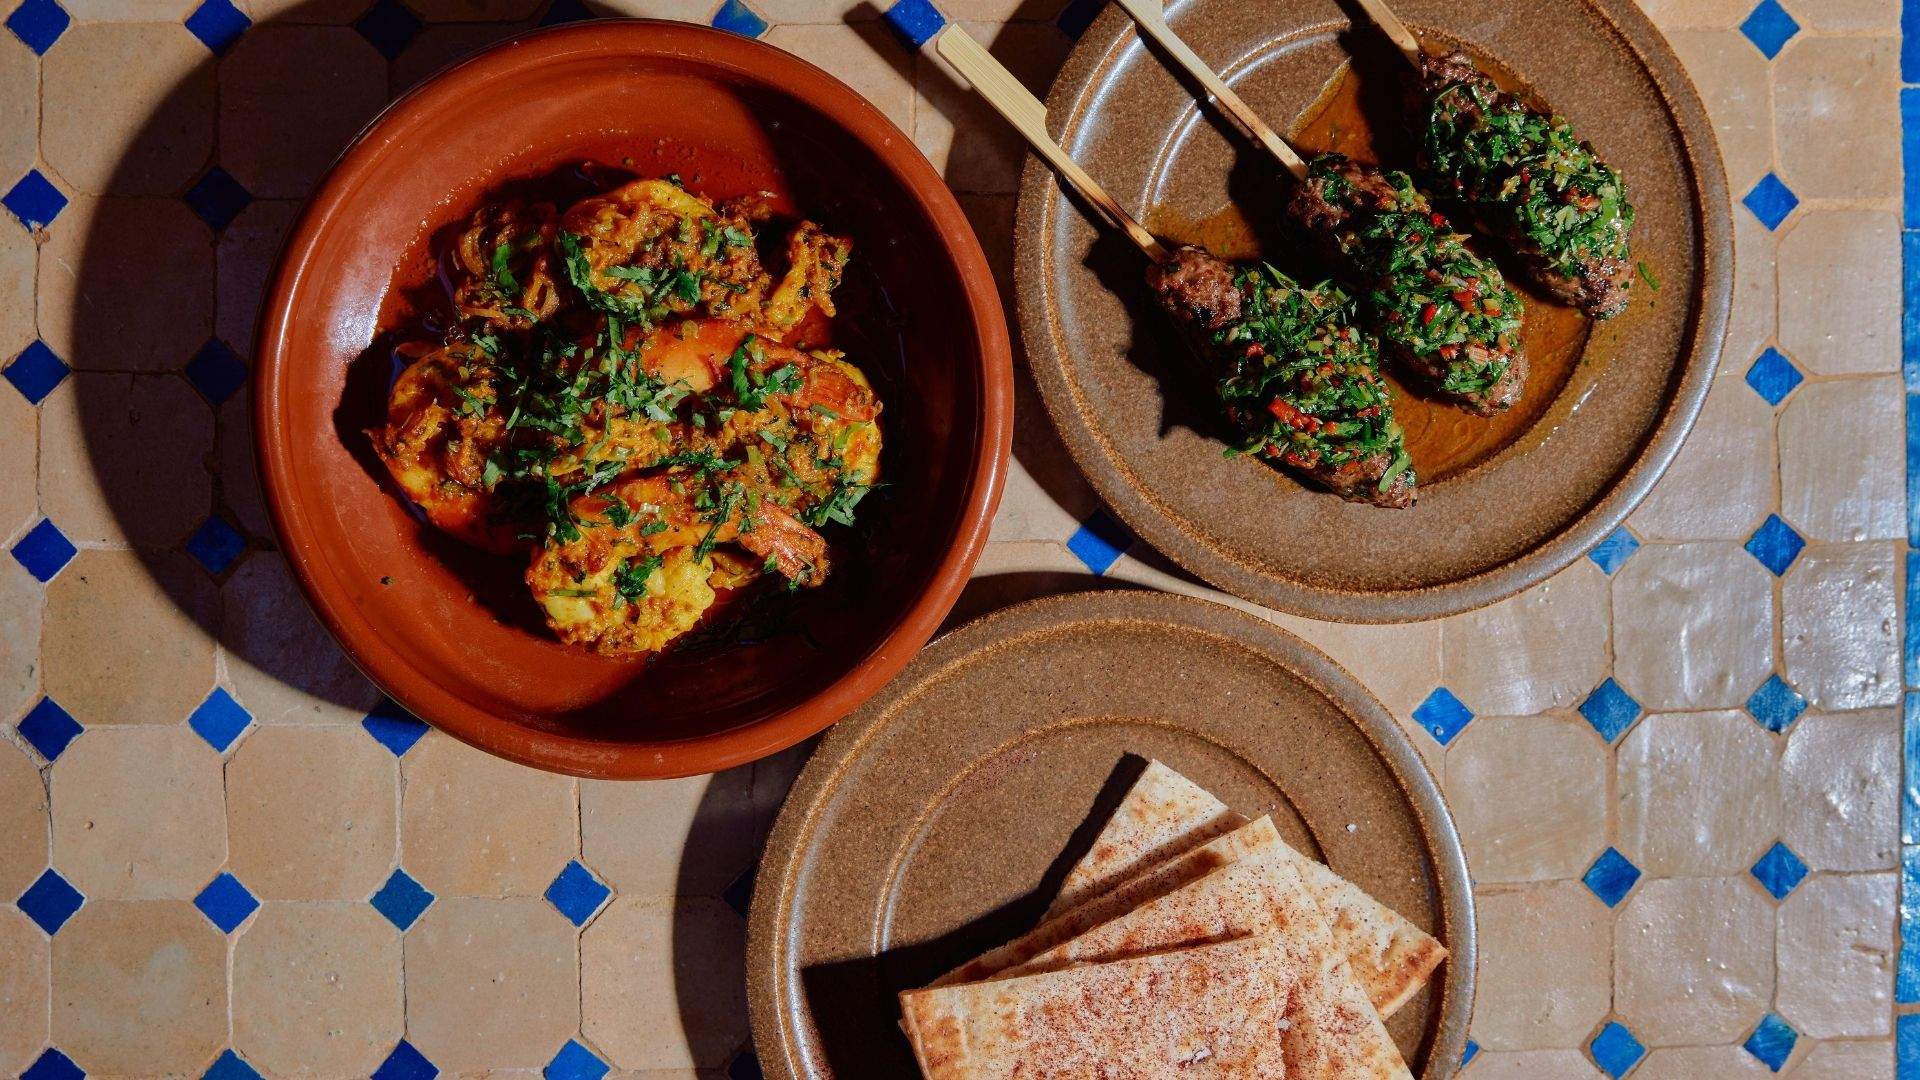 Bites from The Strand Hotel's French-Morrocon fusion cuisine at its revamped rooftop bar, Kasbah.